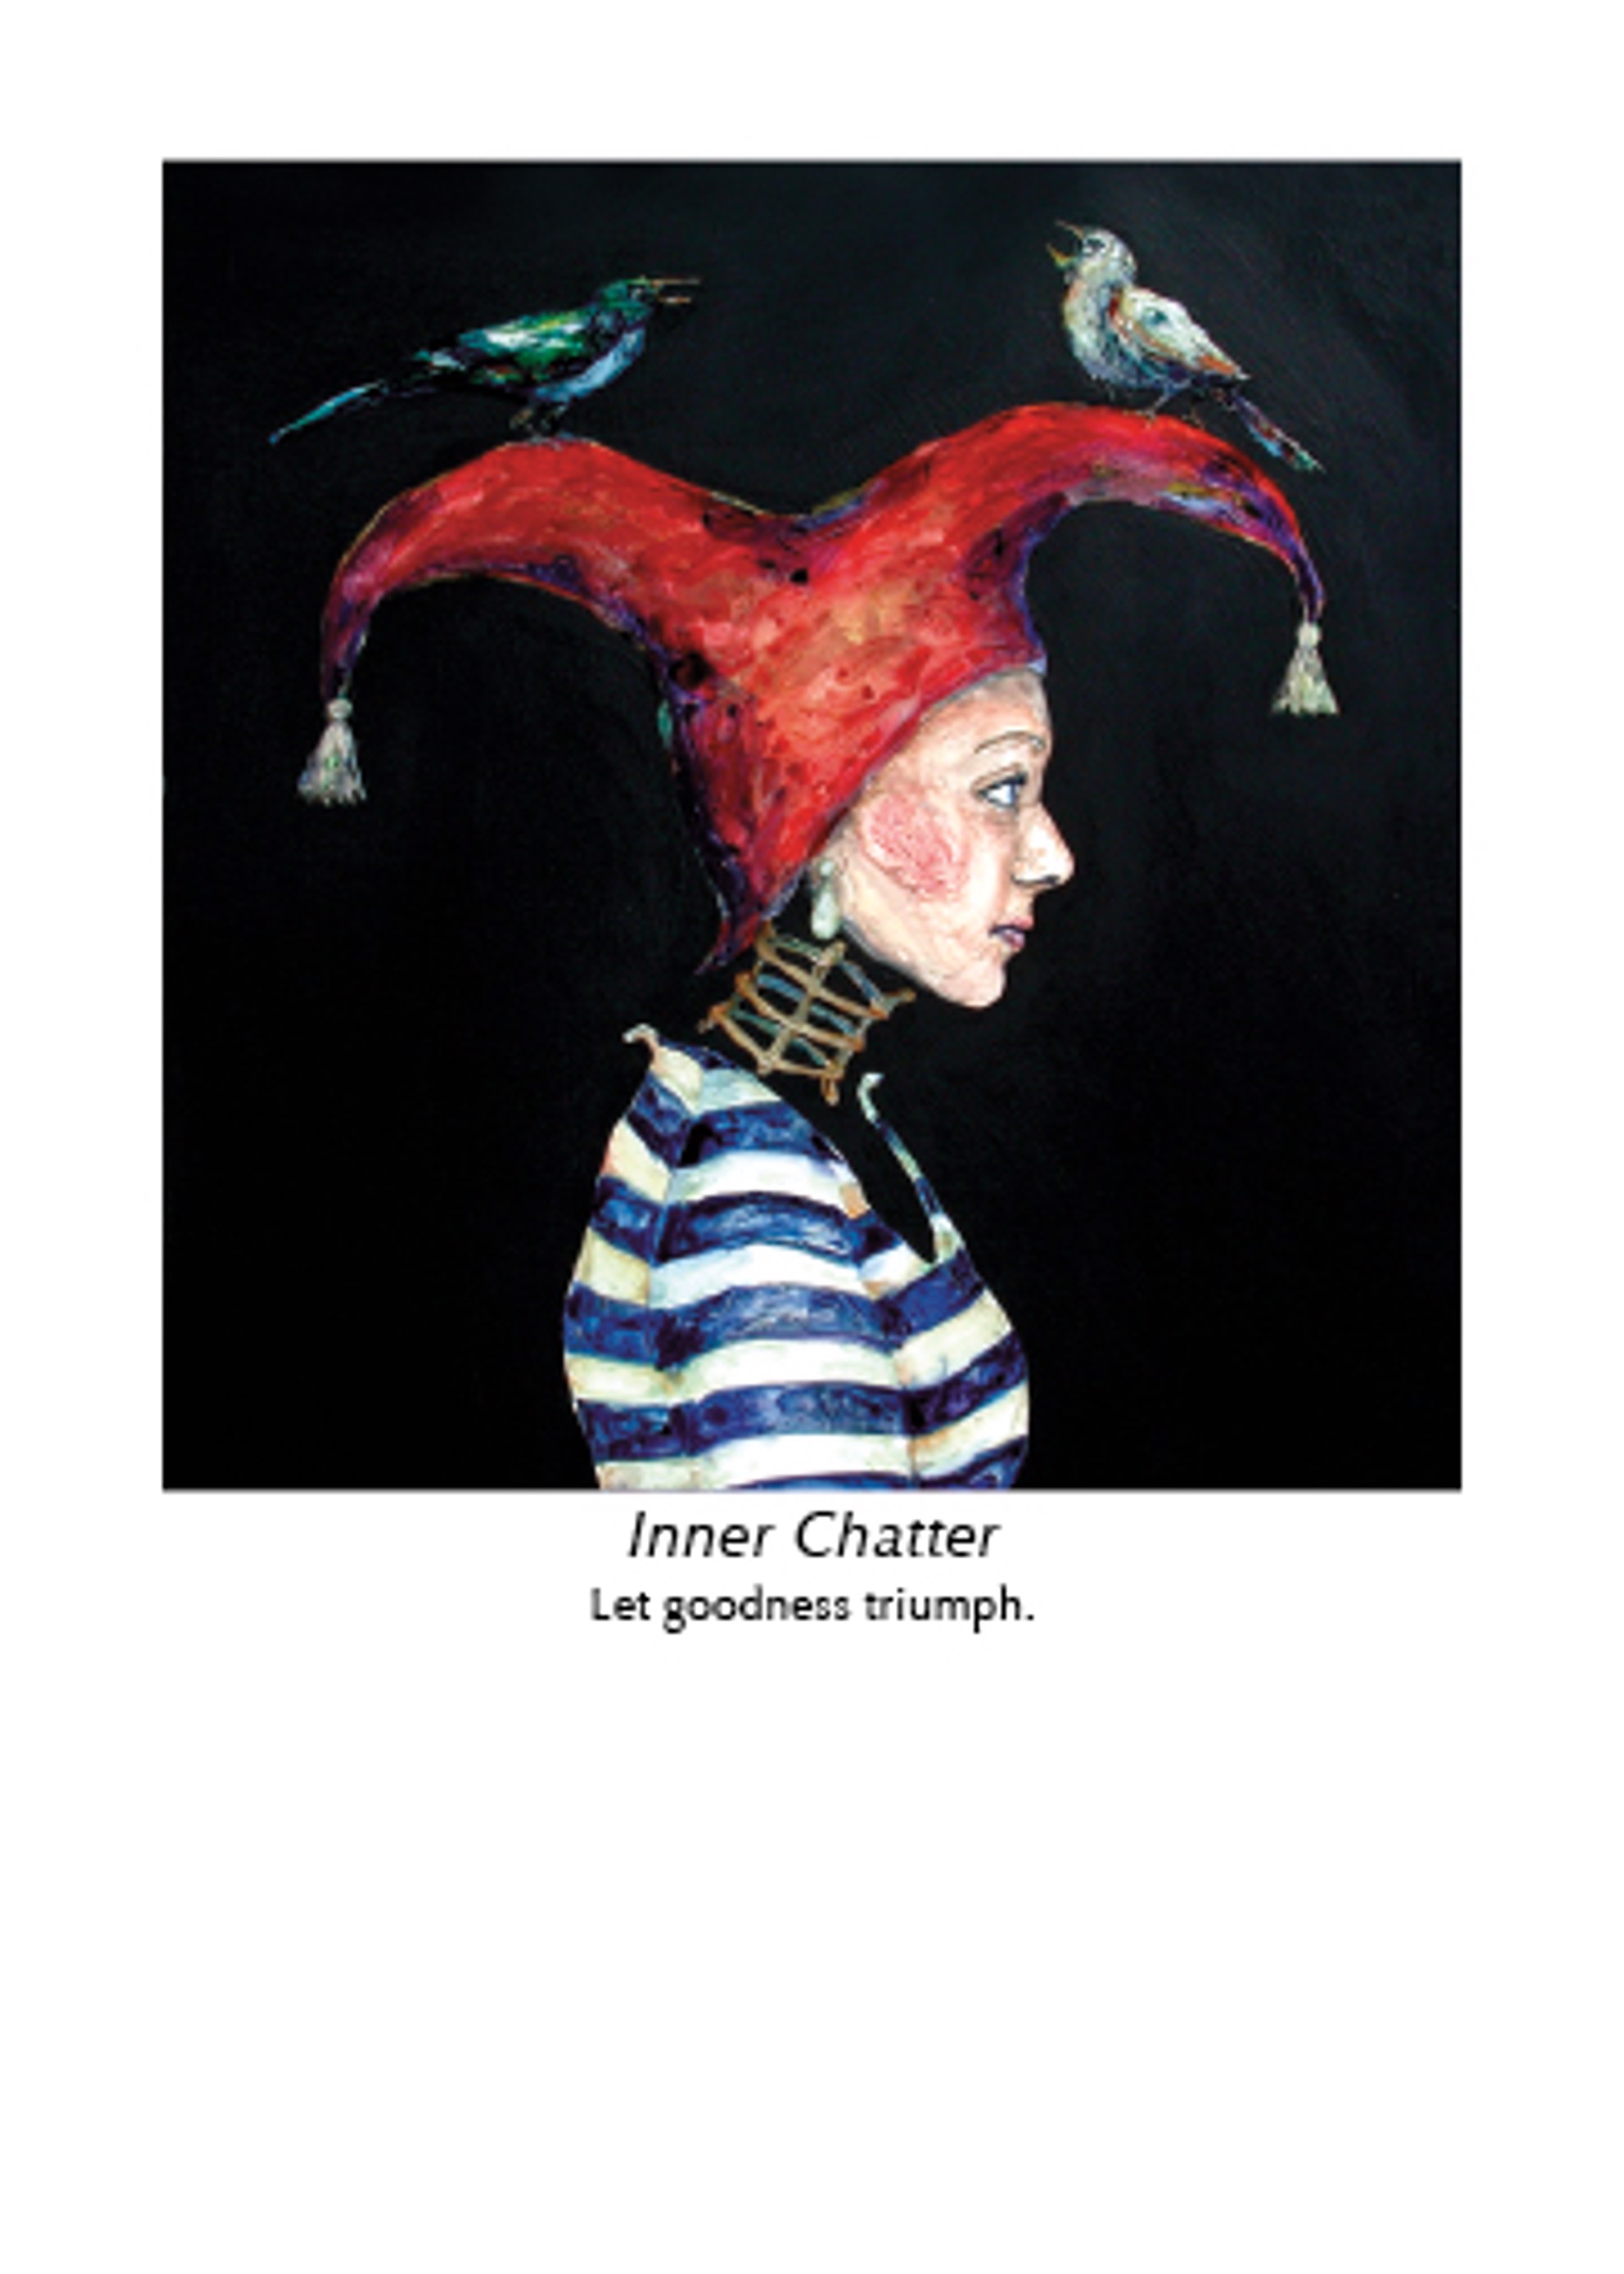 Inner Chatter - card by Carmel Anderson